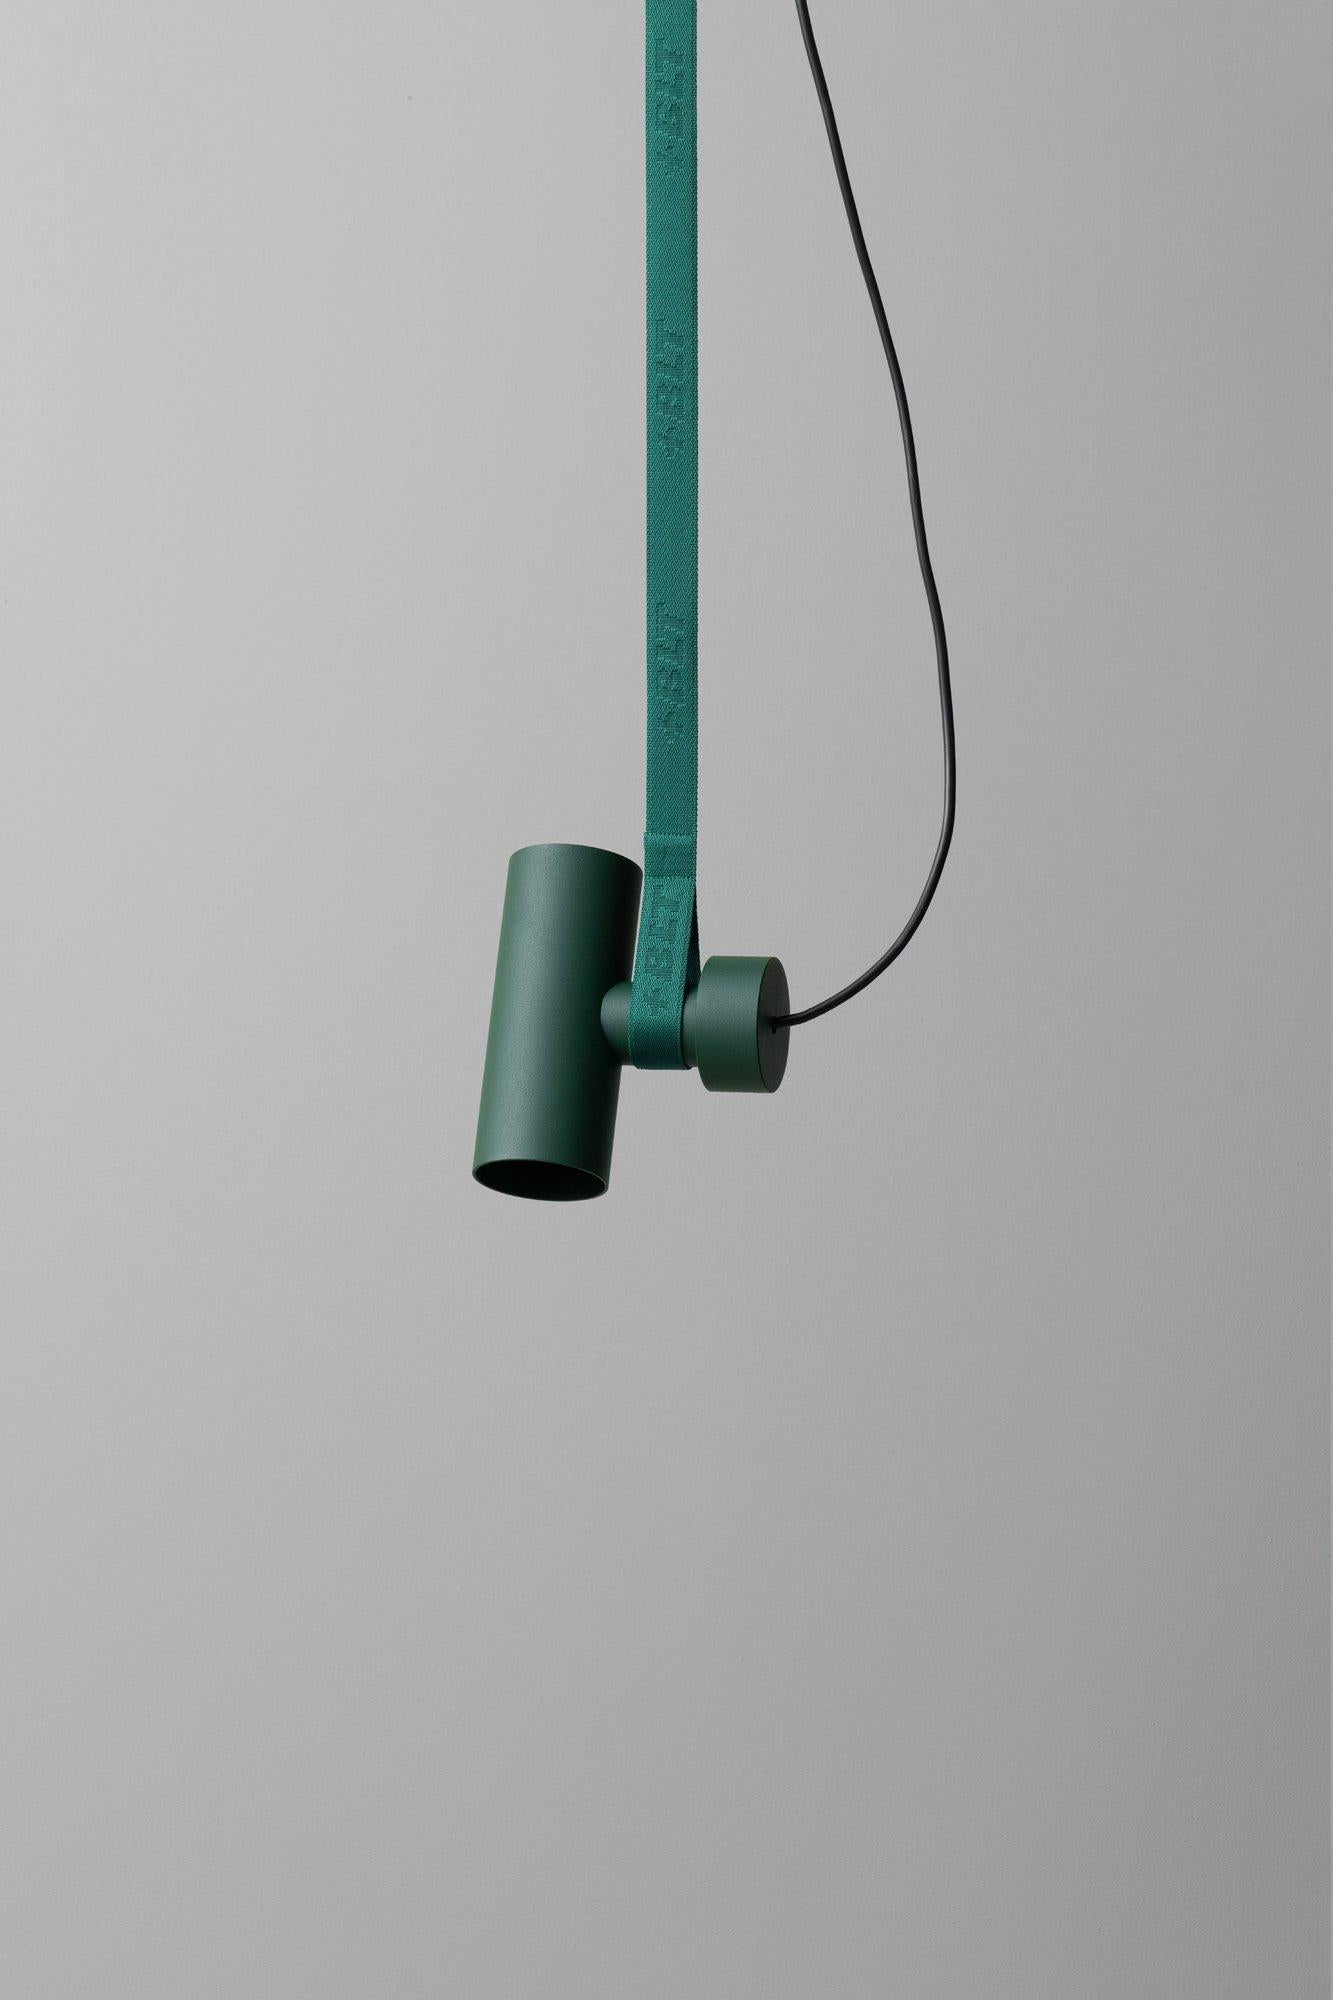 BLT_4 Forest Pendant Lamp by +kouple
Dimensions: D 6,3 x W 13,4 x H 15,5 cm. 
Materials: Powder-coated steel and textile.

Available in different color options. The rod length is 250 cm. Please contact us.

All our lamps can be wired according to